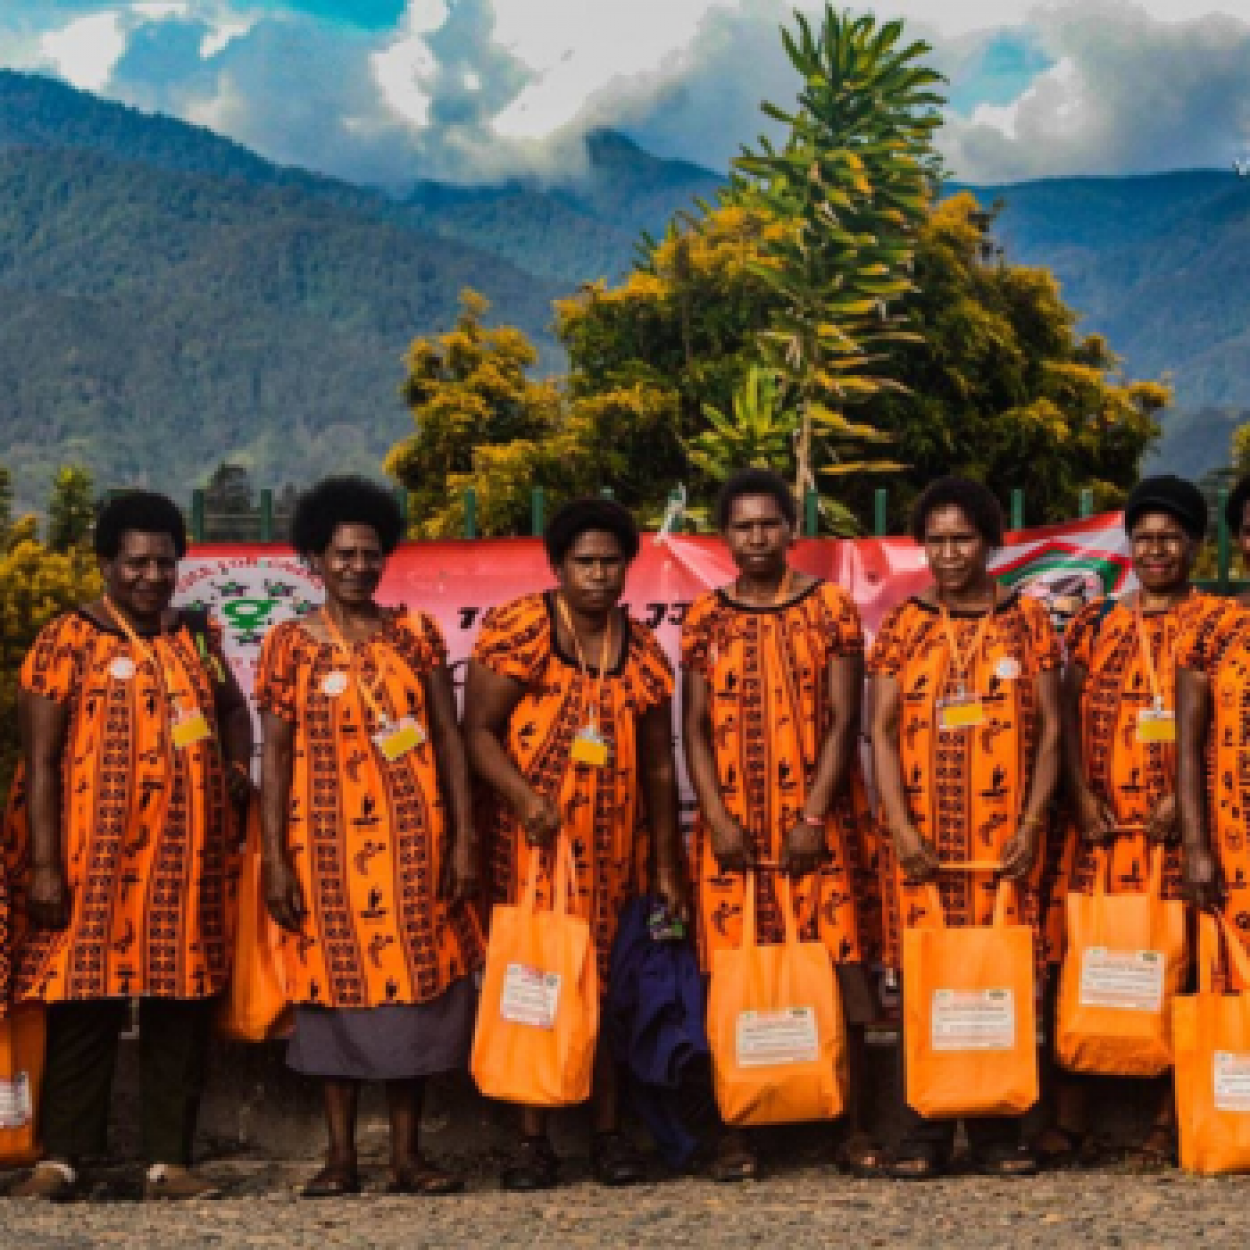 A goup of people stand together in patterned orange print clothing